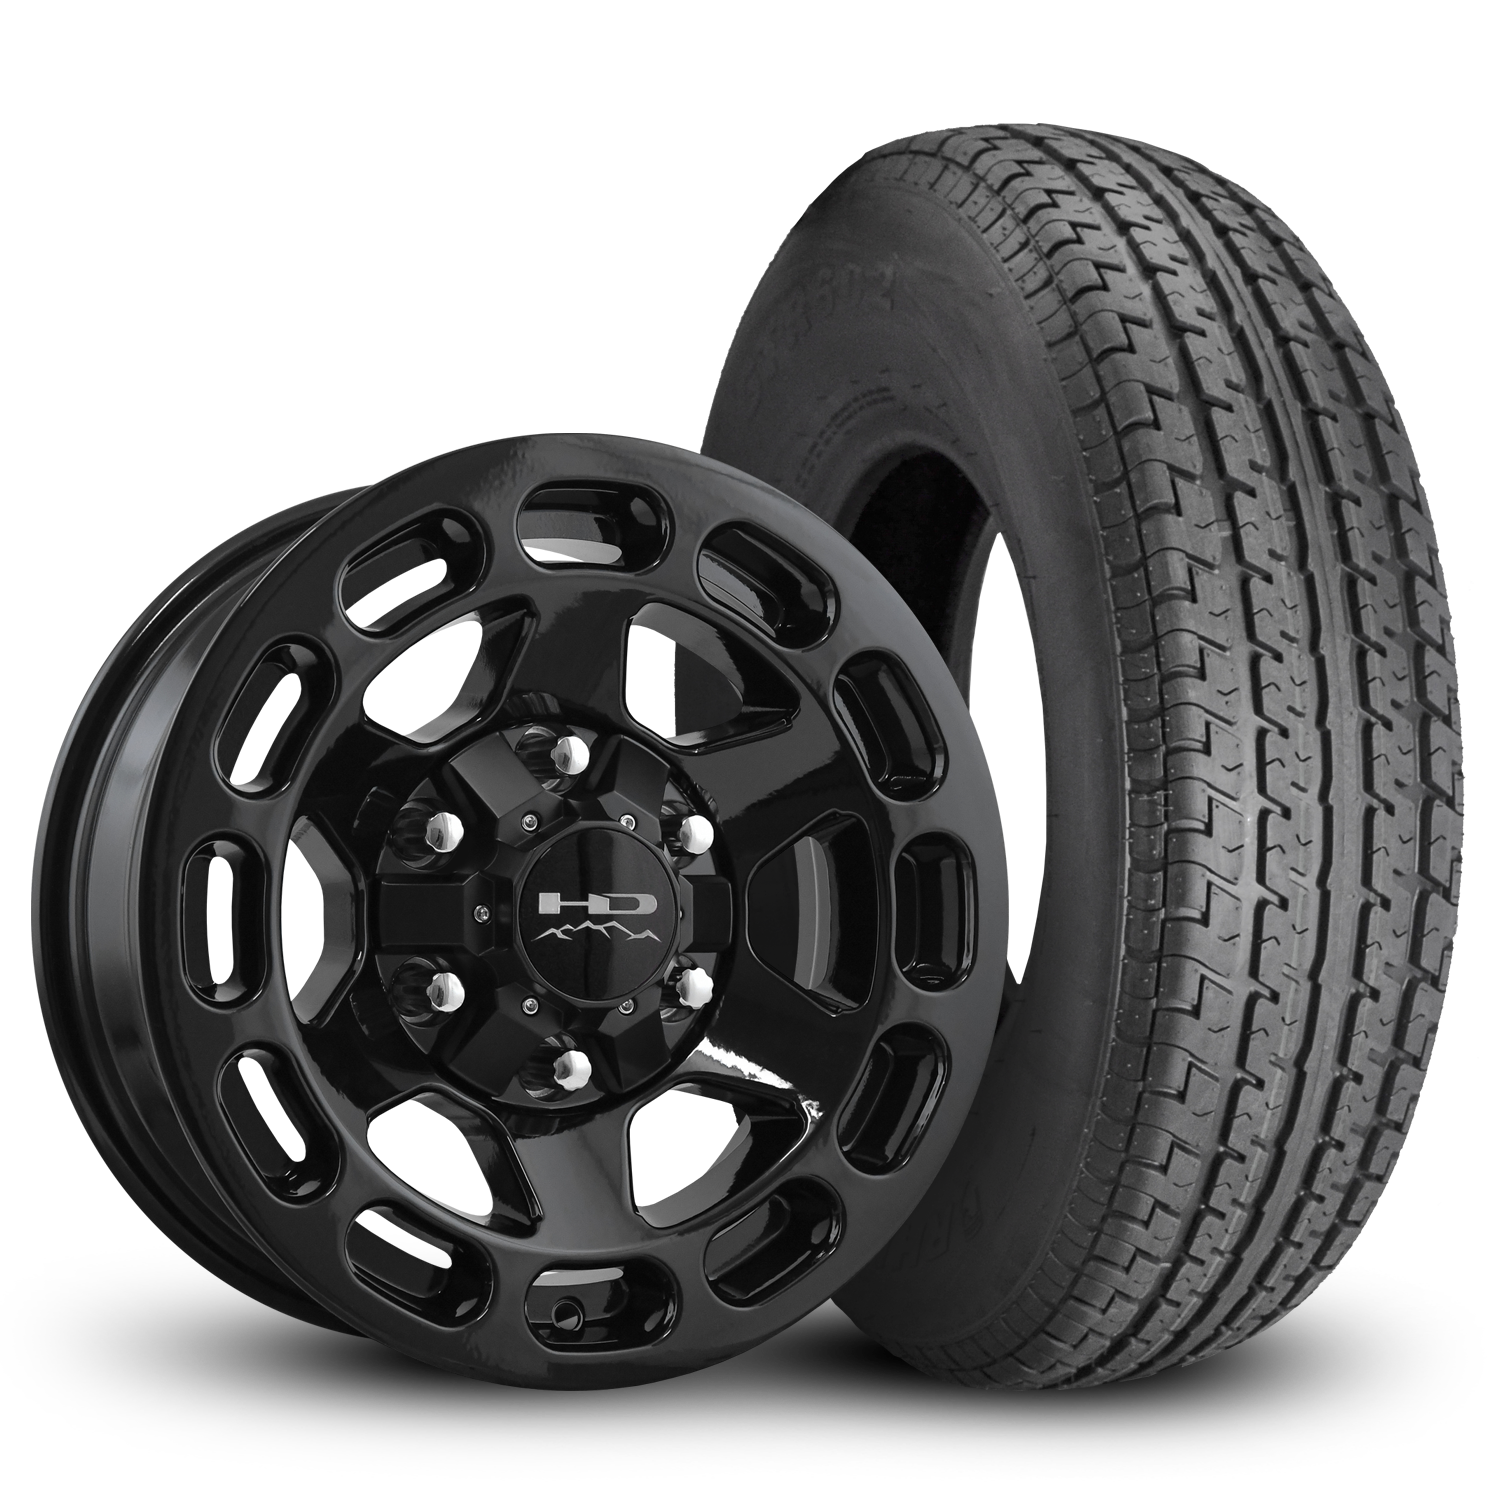 HD Off-Road Patriot Custom Trailer Wheel & Tire packages in 15x6.0 in 6 lug All Gloss Black for Unility, Boat, Car, Construction, Horse, & RV